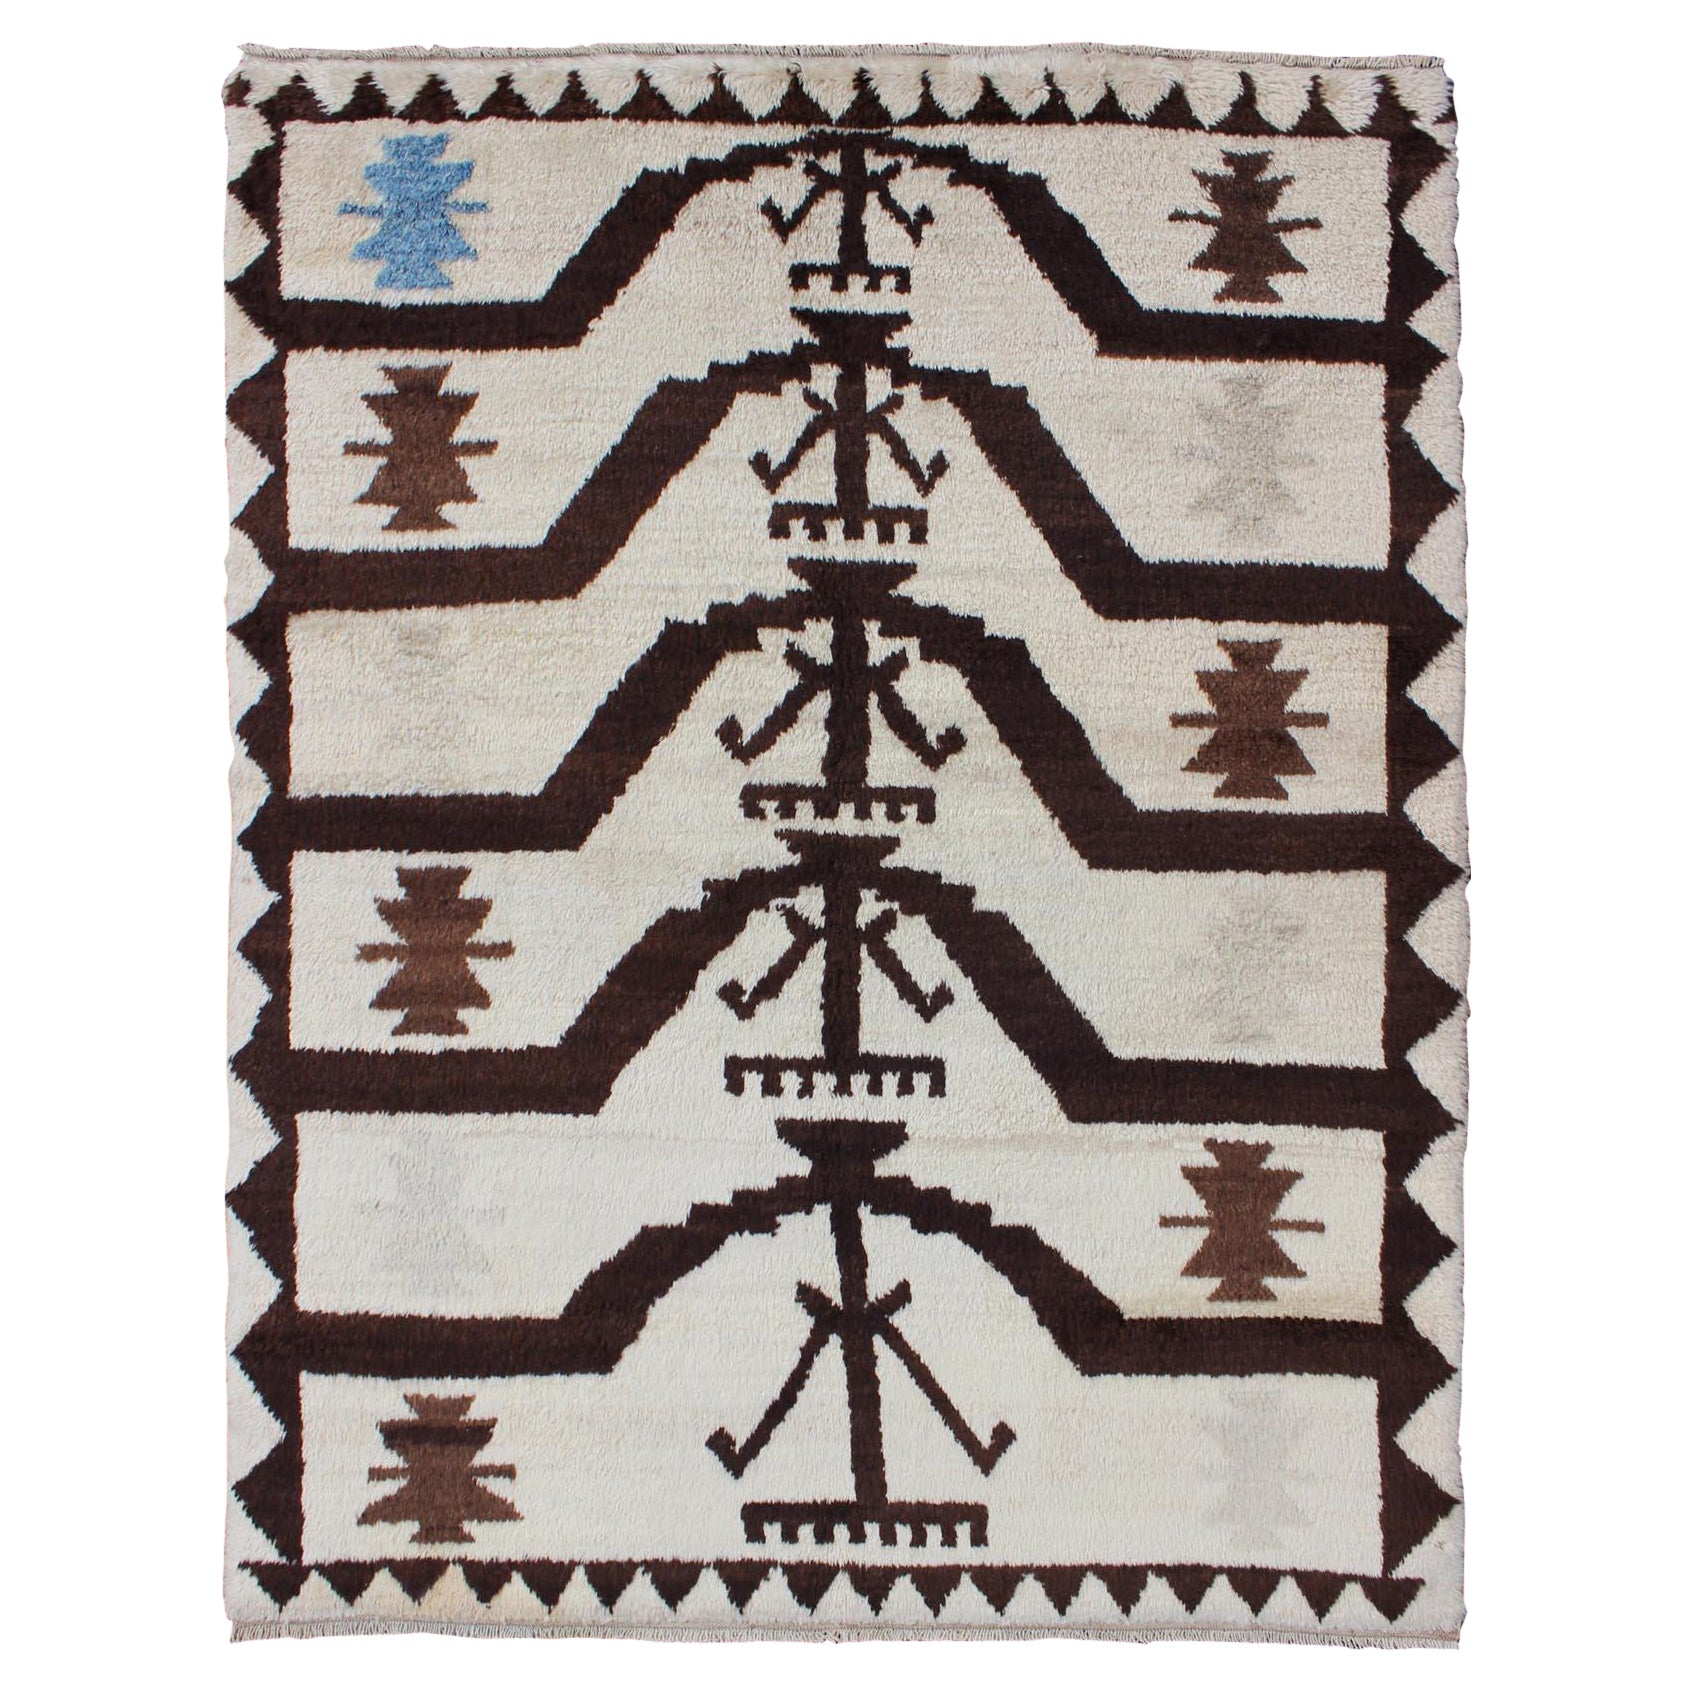 Turkish Tulu Carpet with Mid-Century Modern Design in Brown, Off-White and Blue For Sale